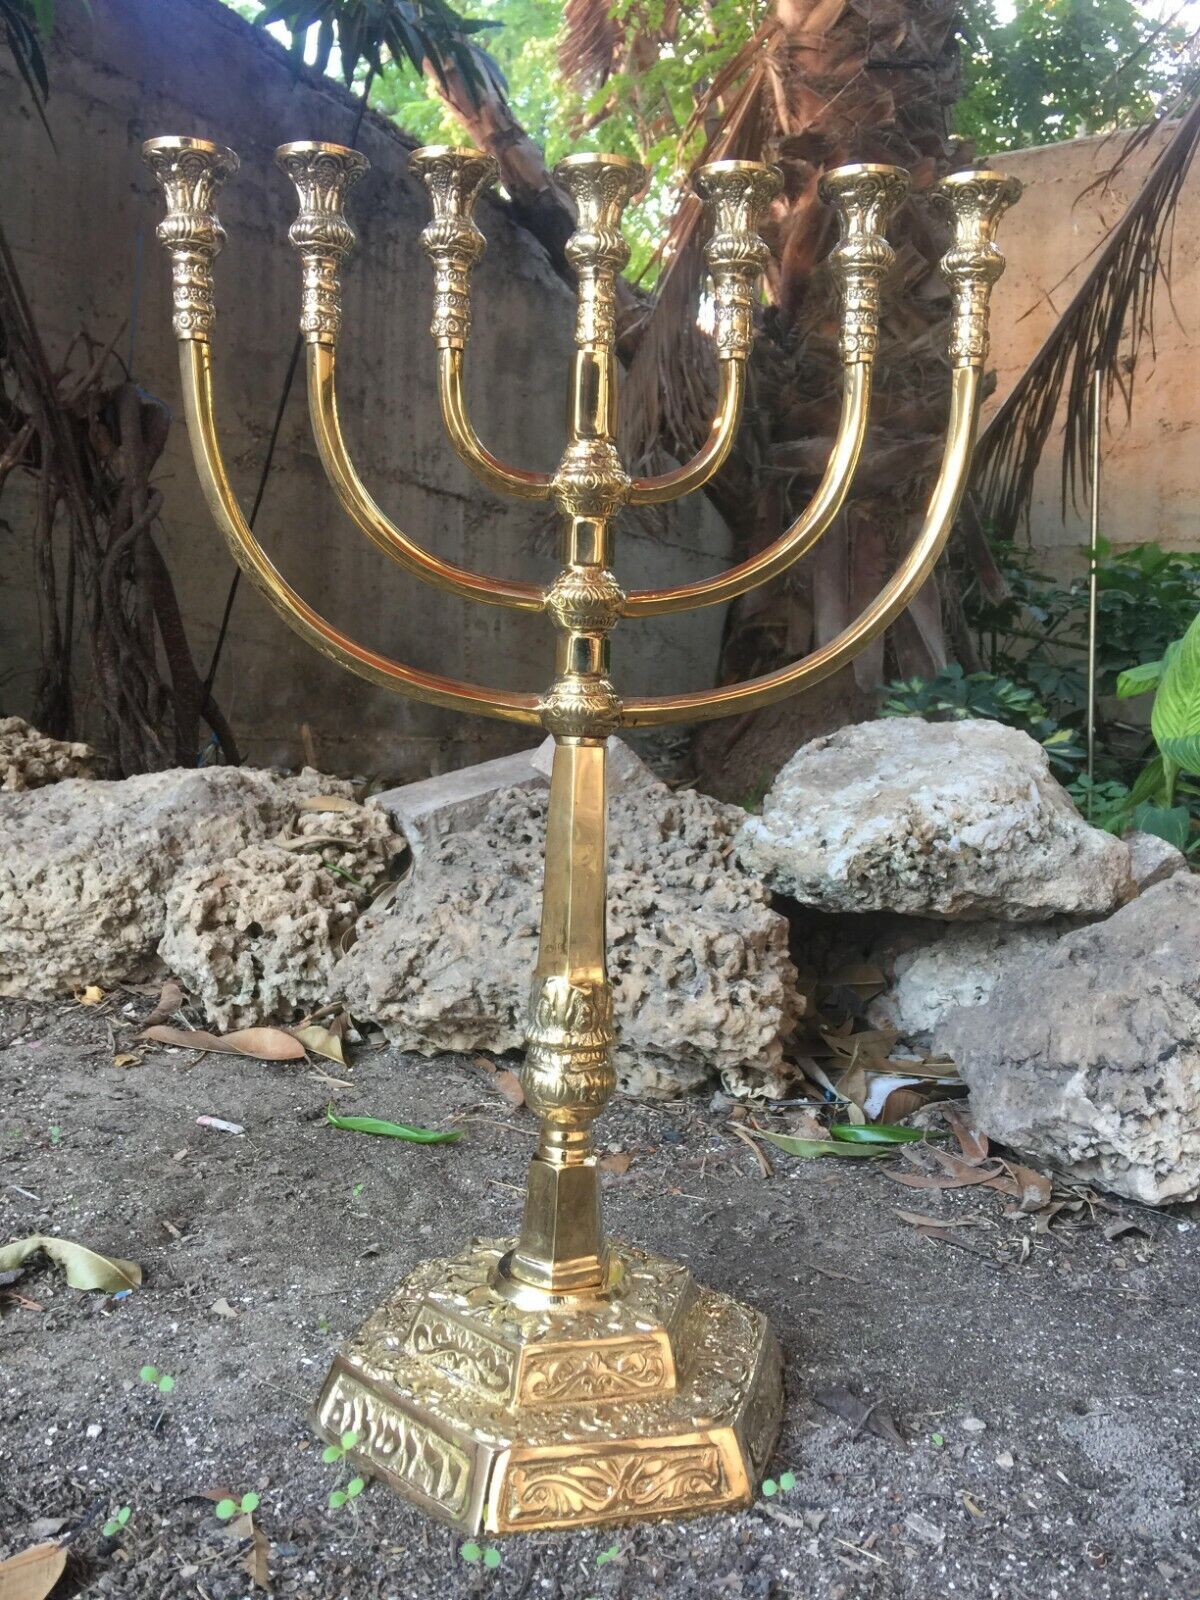 Big Brass Copper 18 Inch Massive Israel Temple Menorah 7 branches Candle Holder